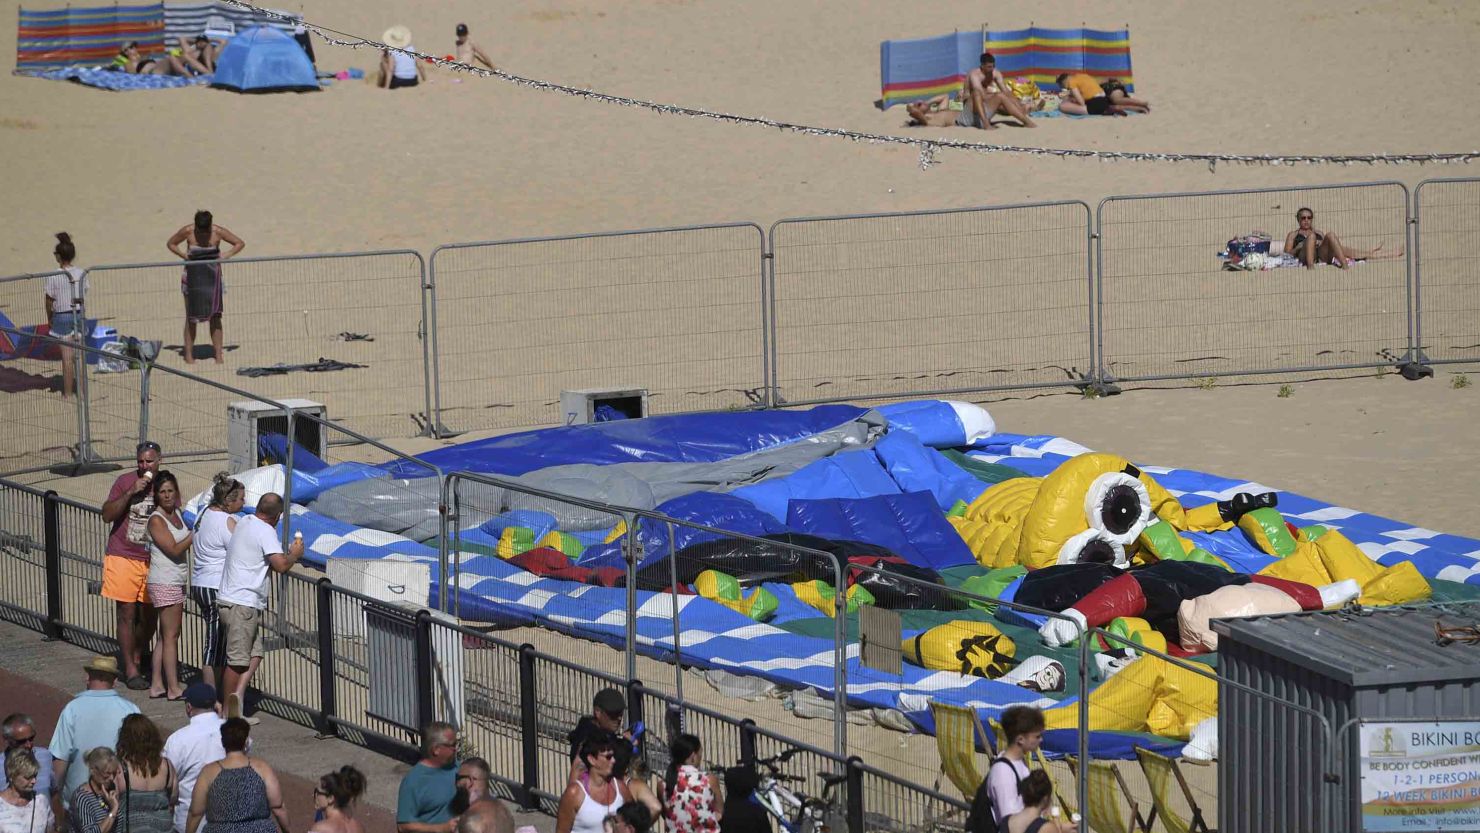 Witnesses say a bouncy castle exploded and threw a girl from it Sunday in eastern England.